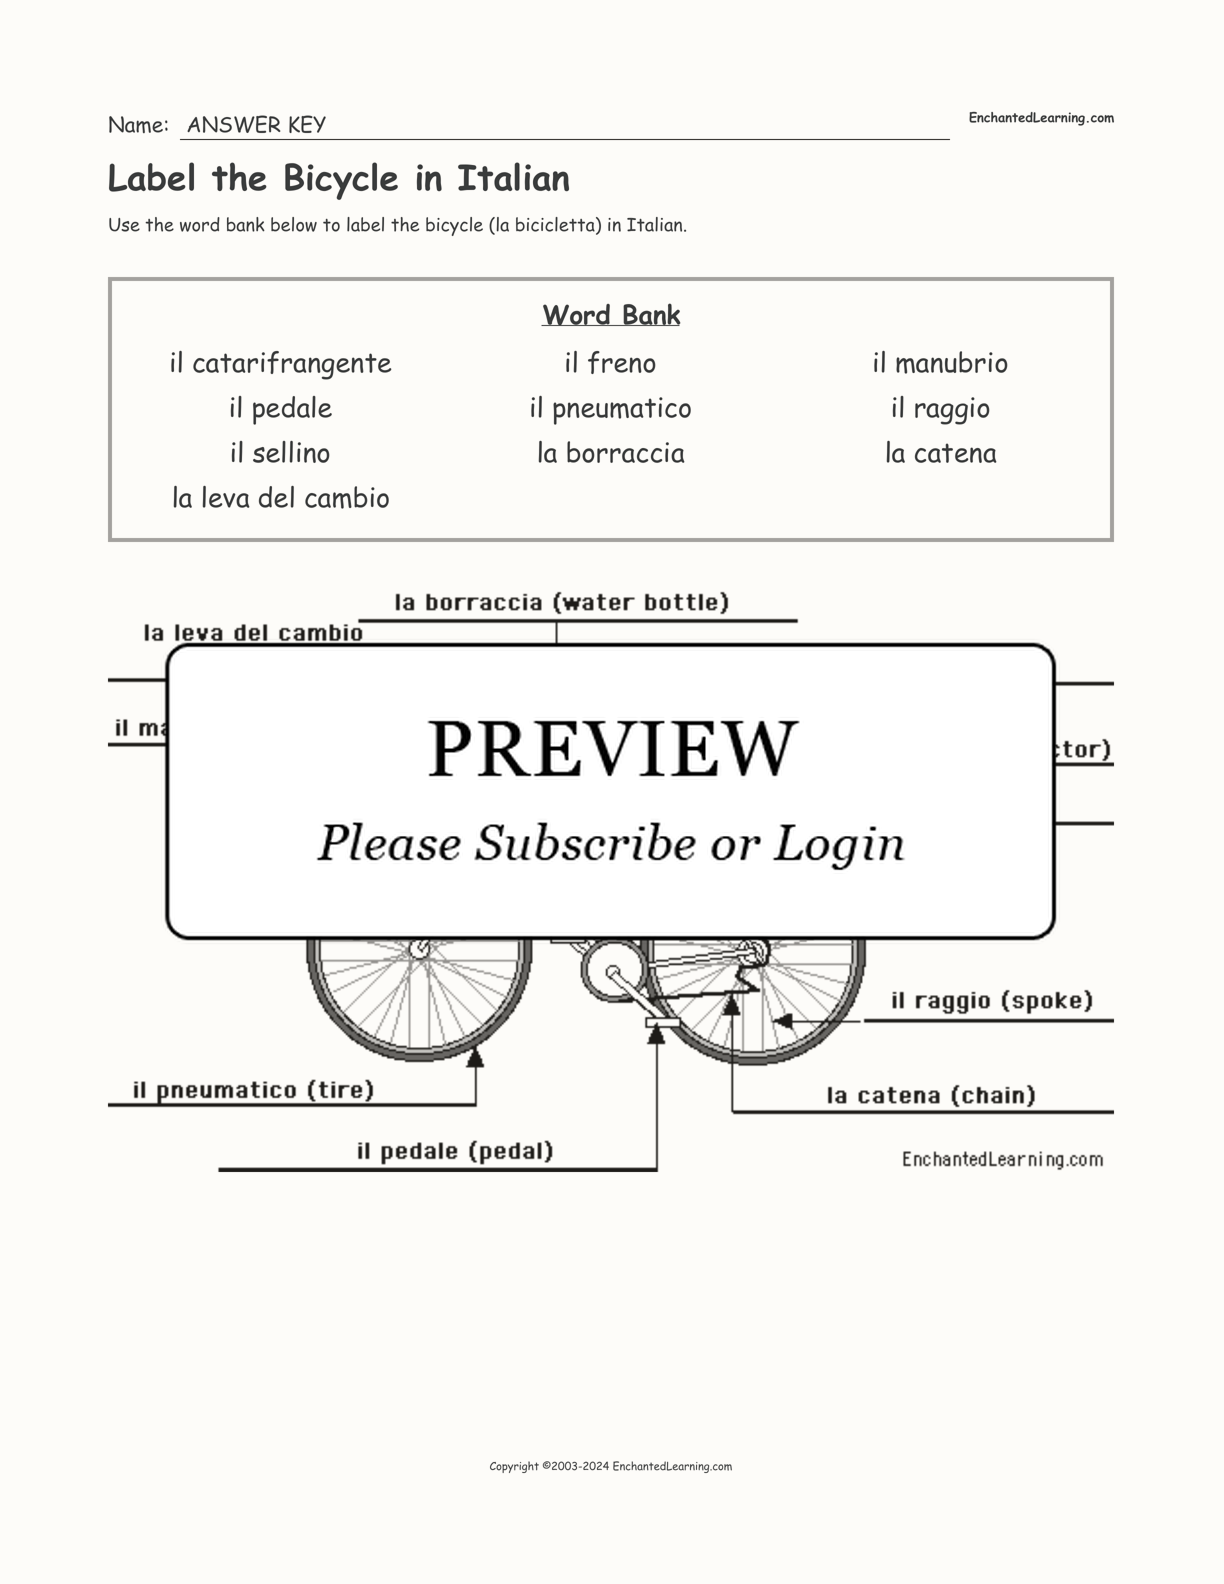 Label the Bicycle in Italian interactive worksheet page 2